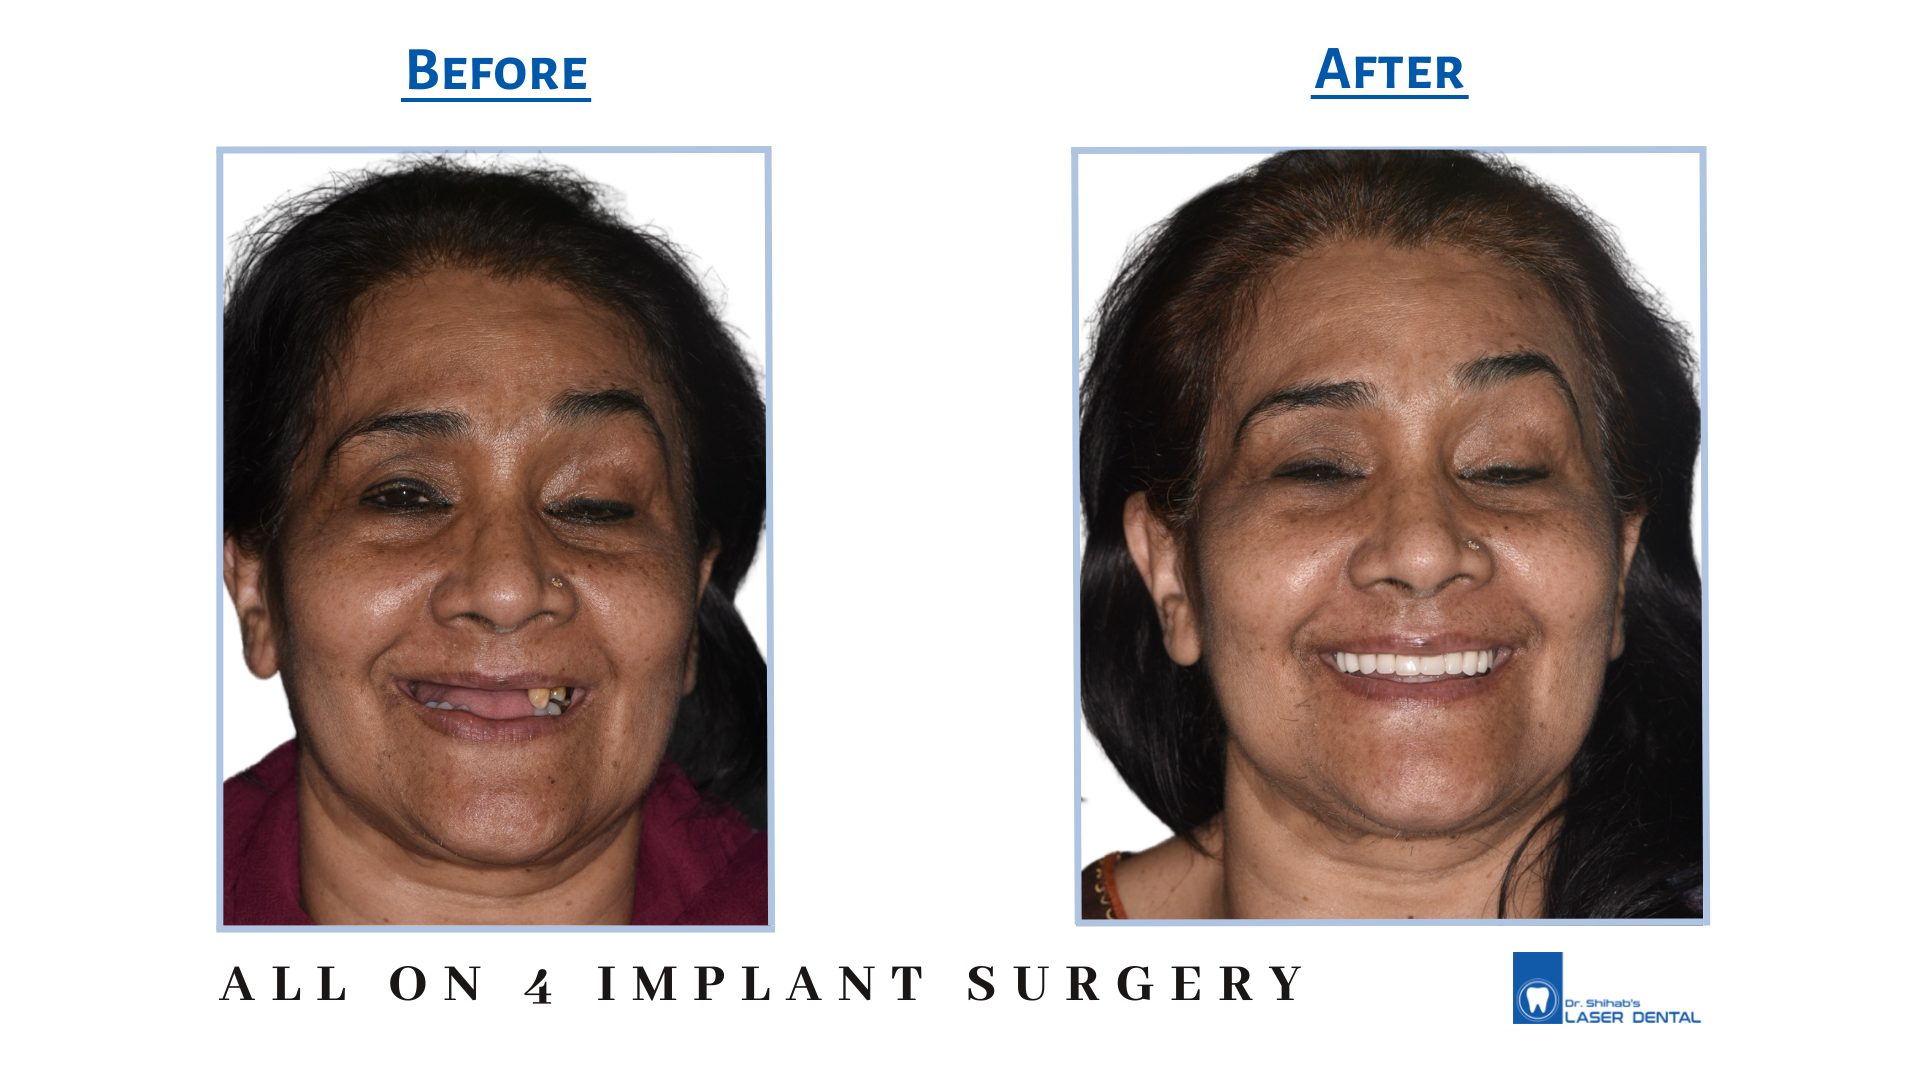 All on 4 implant surgery